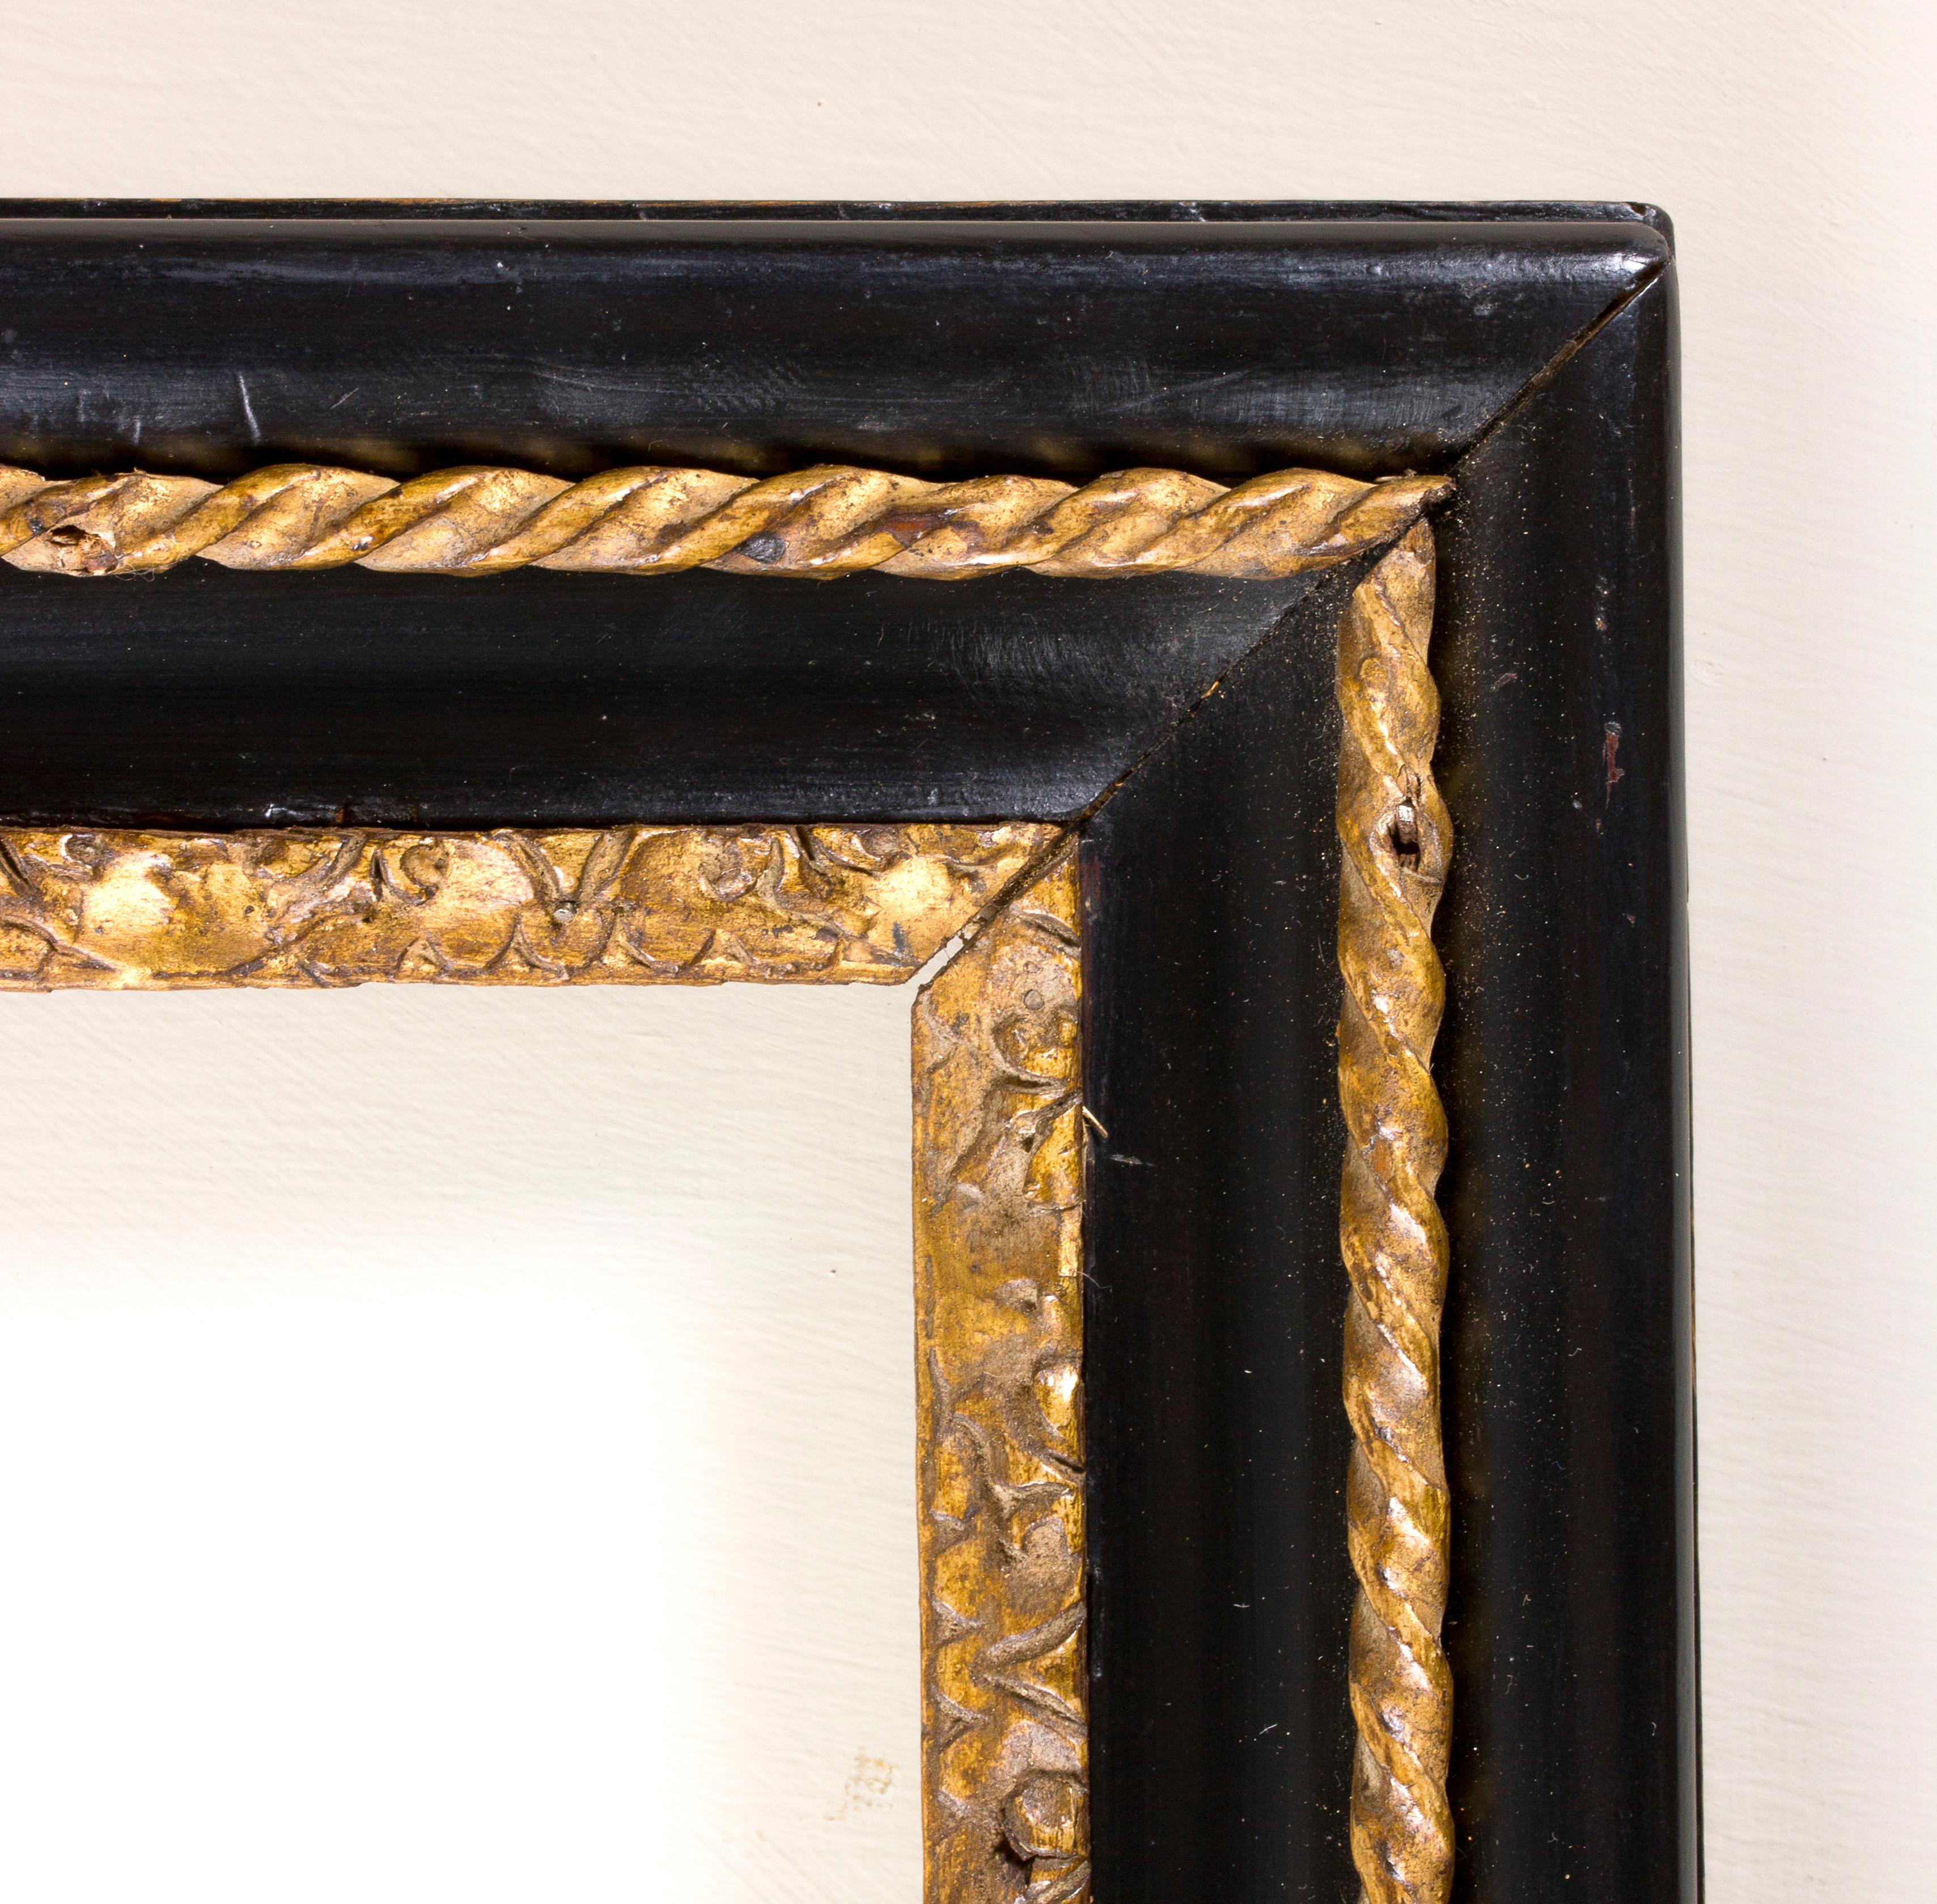 Maratta frame, Italy, 18th century
Golden, ebonized and carved wooden frame.
Inside: 24.3 x 18 cm; outside: 34.5 x 28.2 cm.
Depth is the wide of the band.
 